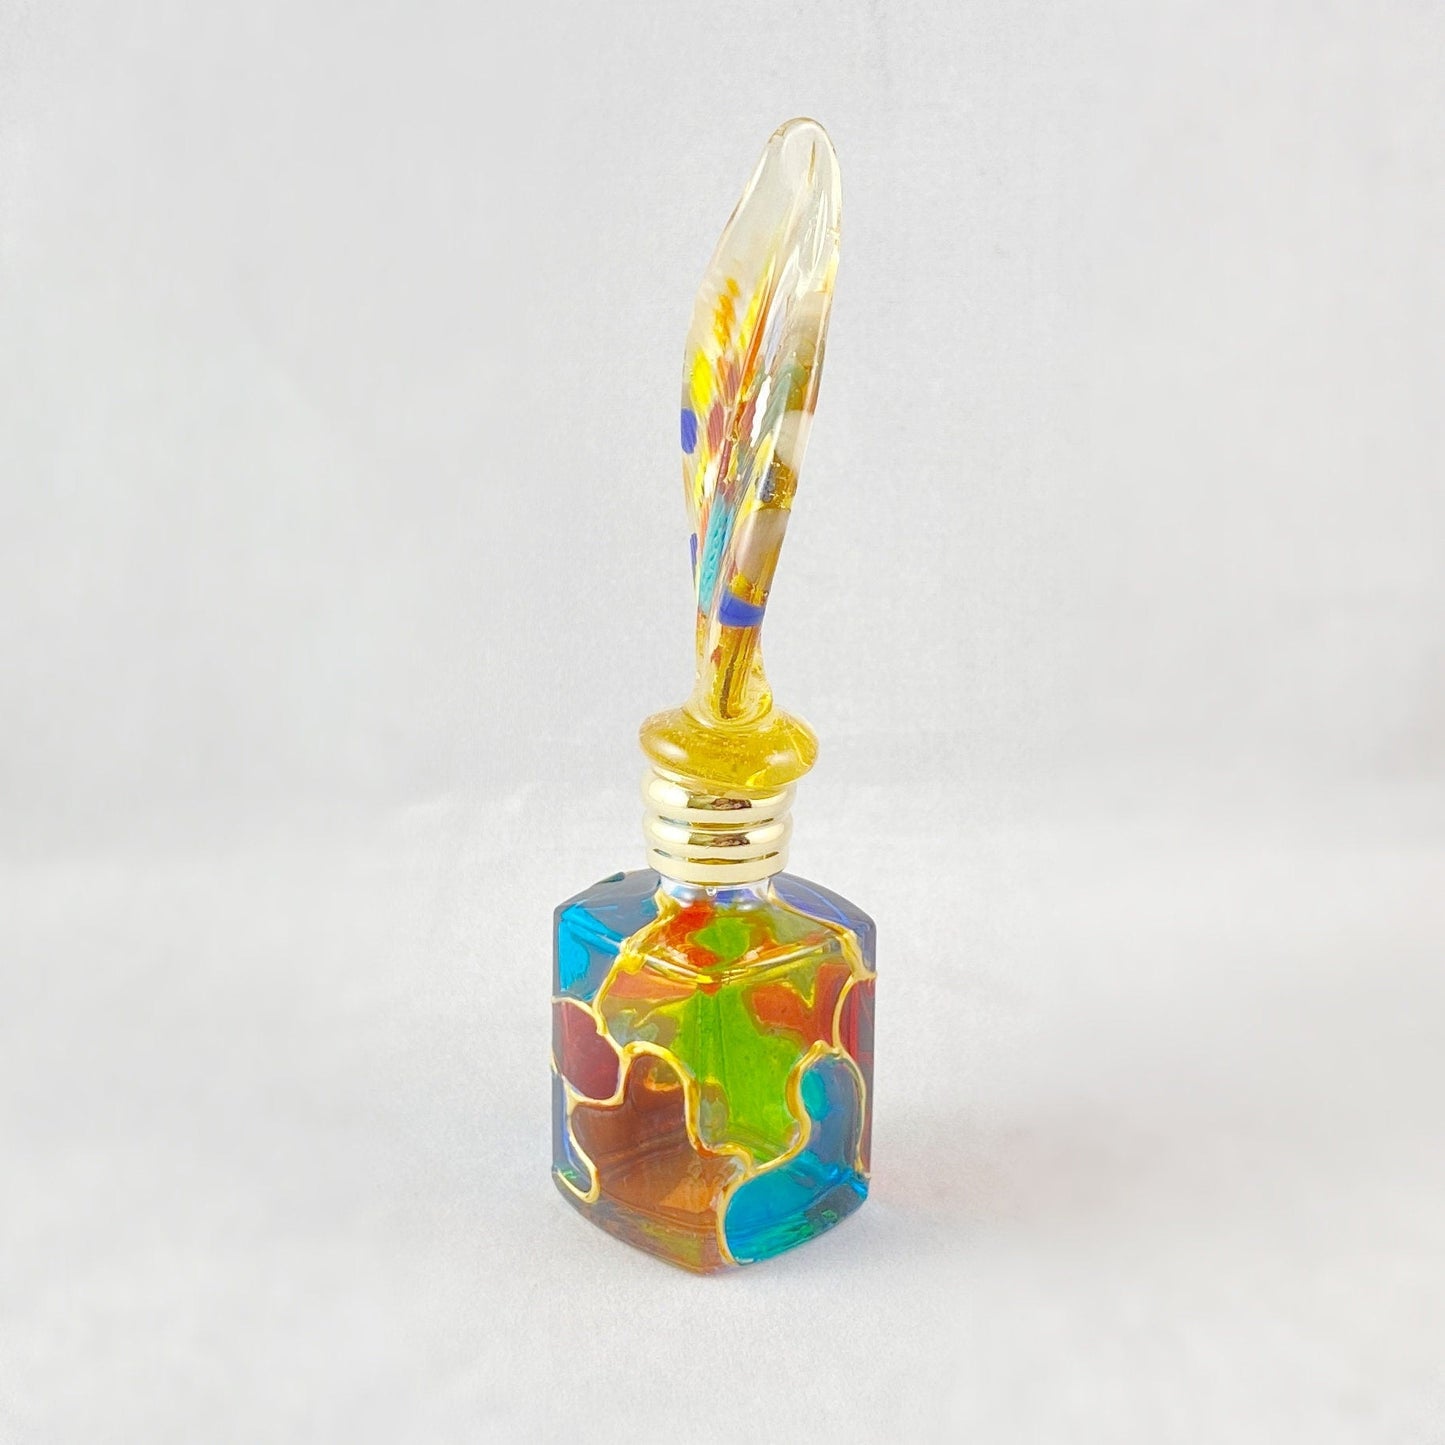 Feather Top Venetian Glass Perfume Bottle - Handmade in Italy, Colorful Murano Glass